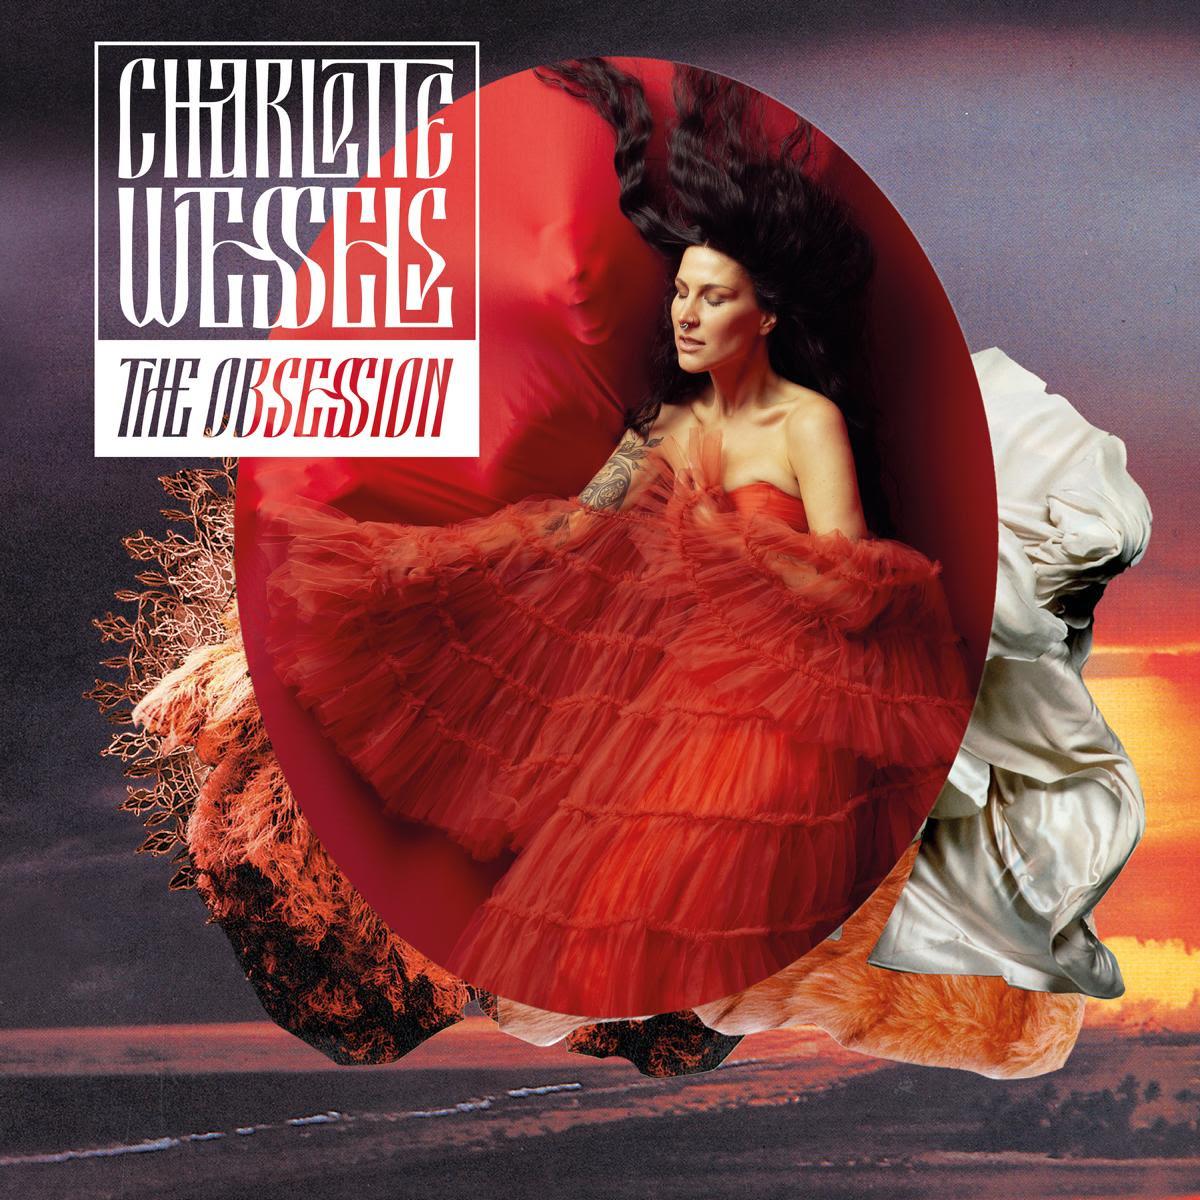 The obsession artwork